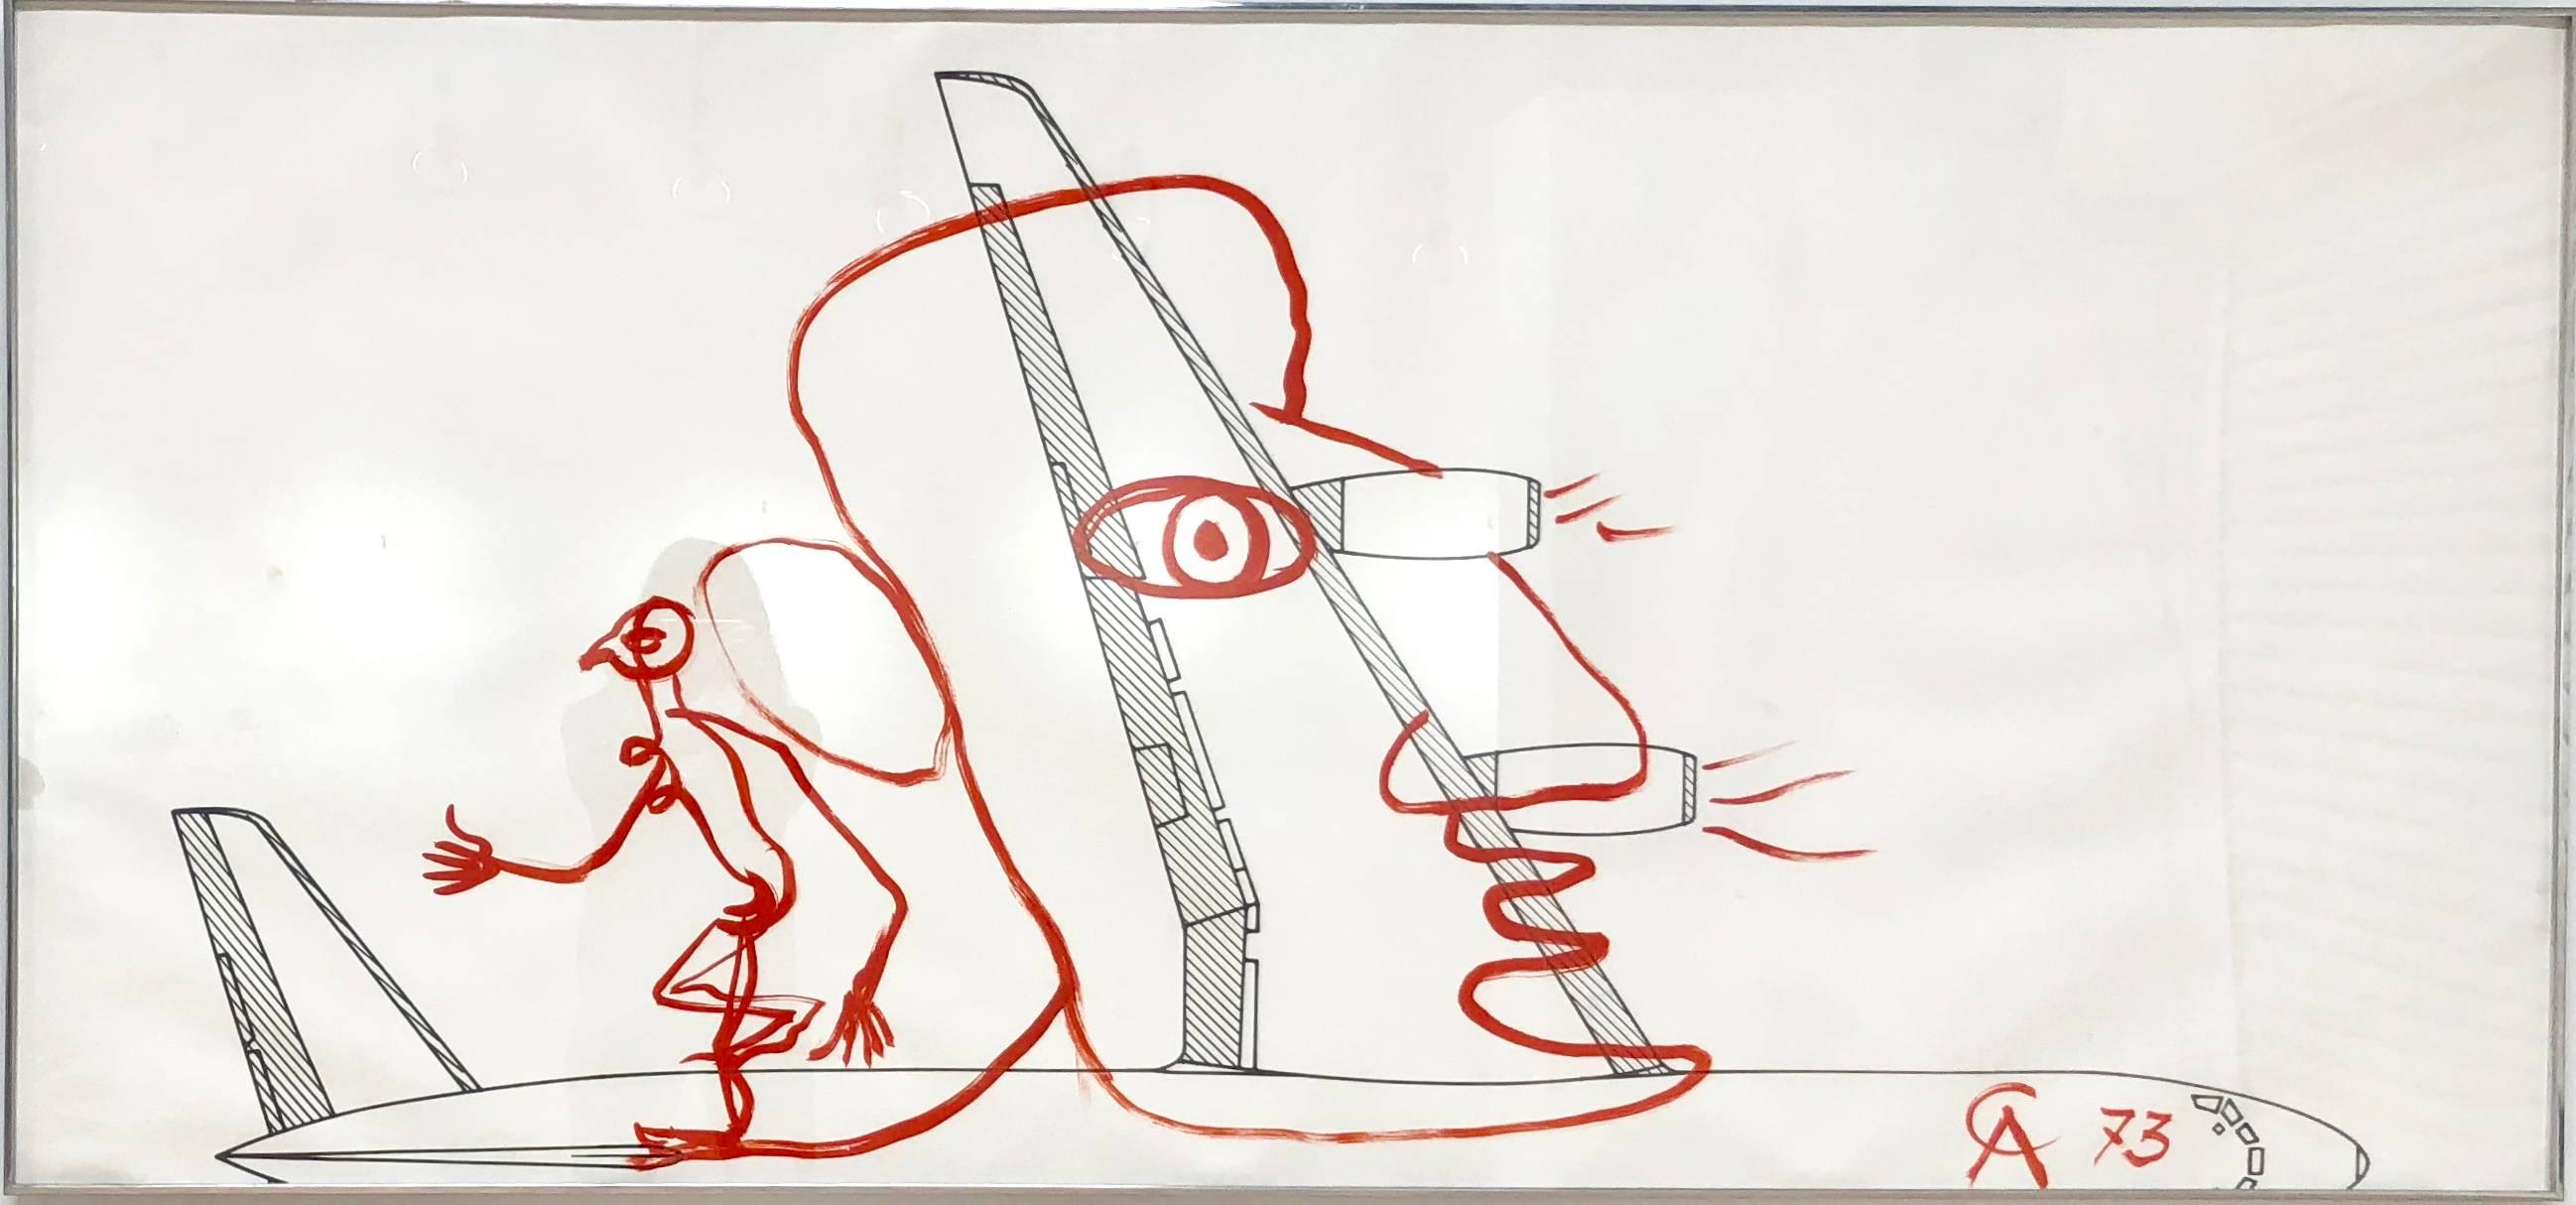 Untitled (For Braniff Airlines) - Painting by Alexander Calder